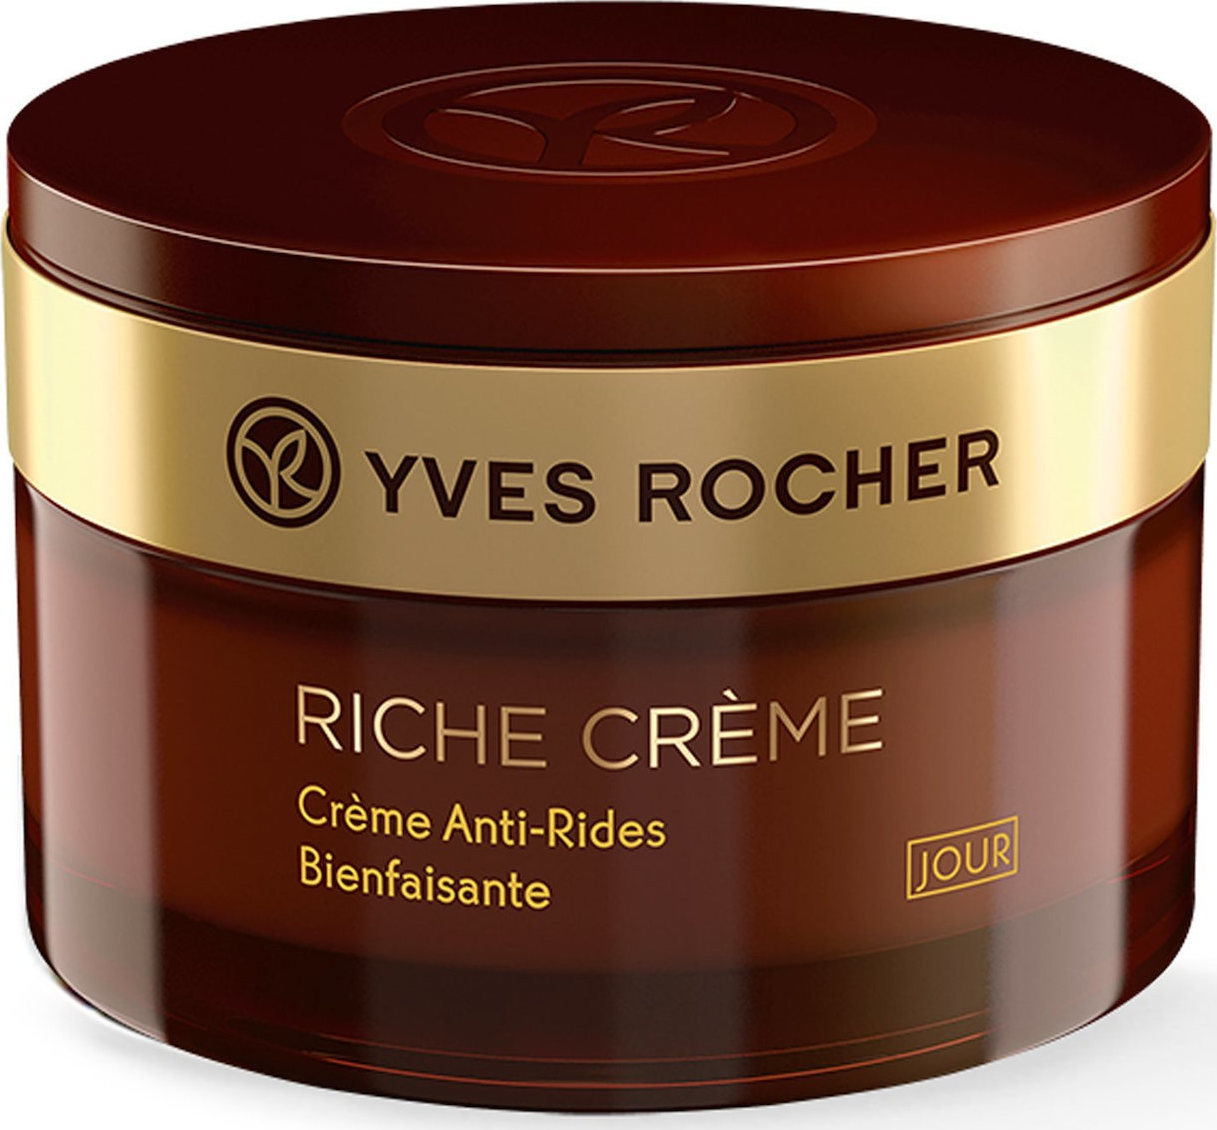 Yves Rocher Riche Creme Comforting Anti Wrinkle Day Cream 50ml | Skroutz.gr